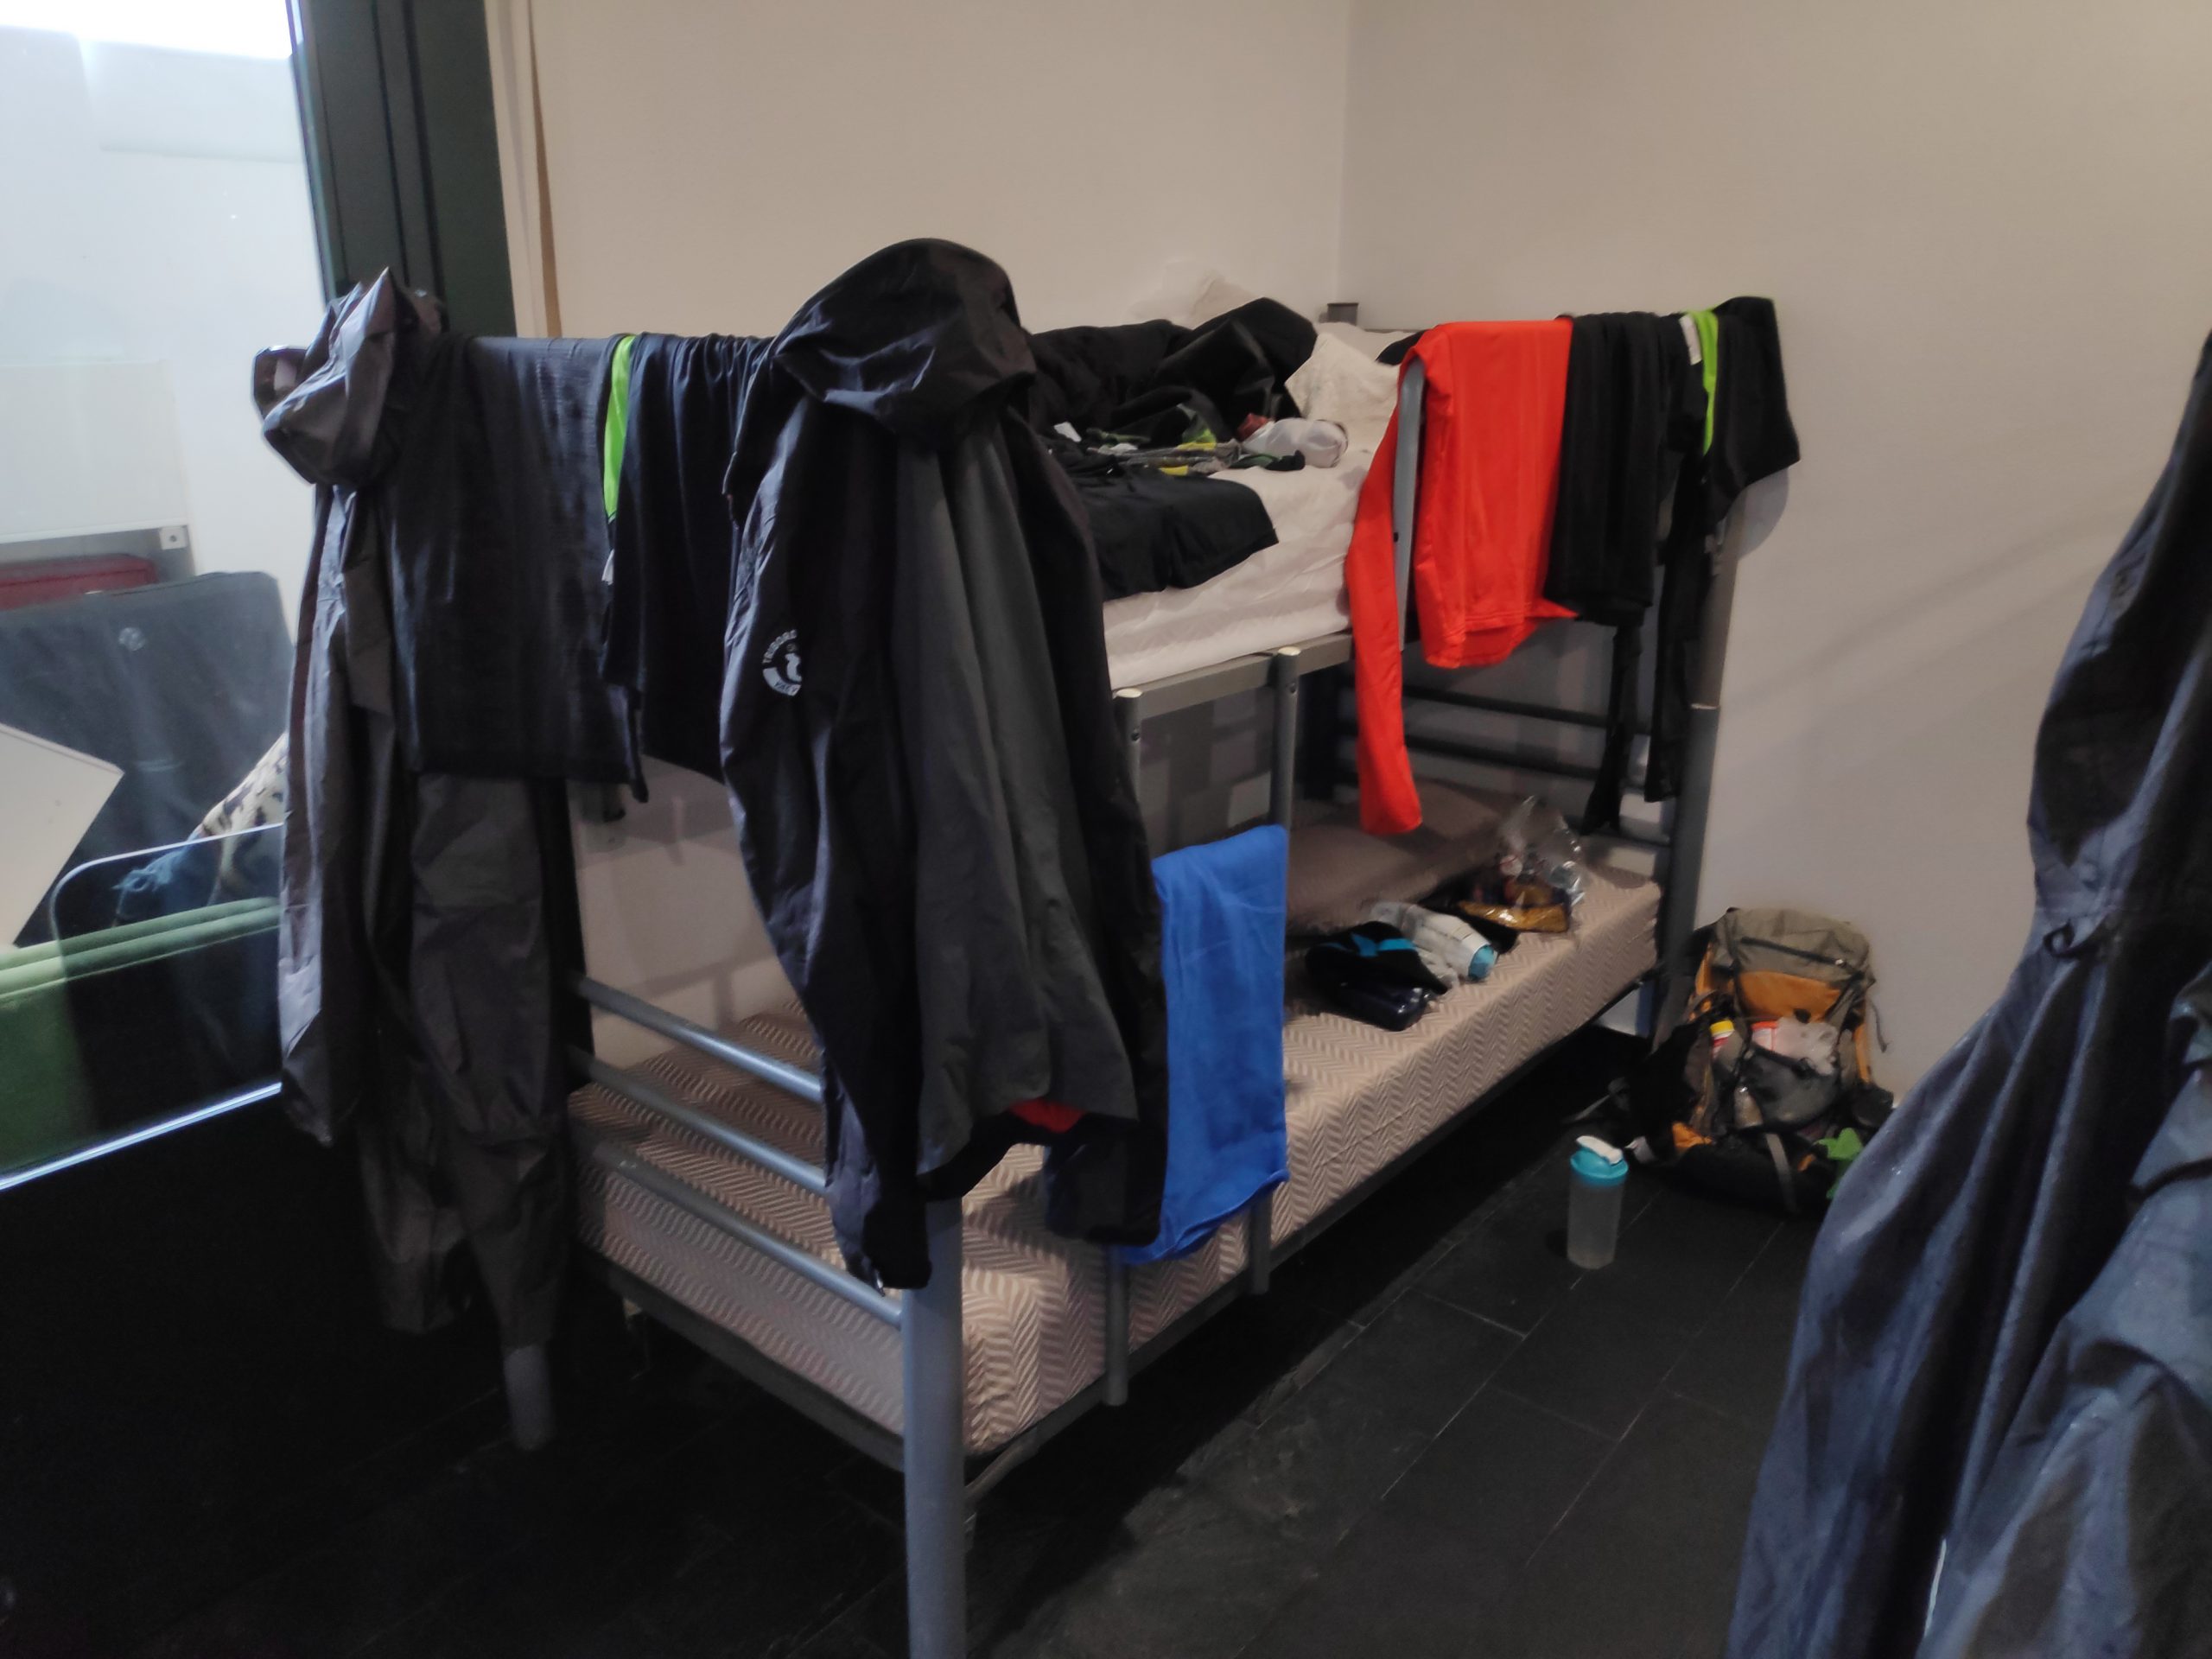 In hte evening it was time to dry everything. Luckily the Albergue was nice and warm. I really didn't know Spain even has heating, let alone floor heating.